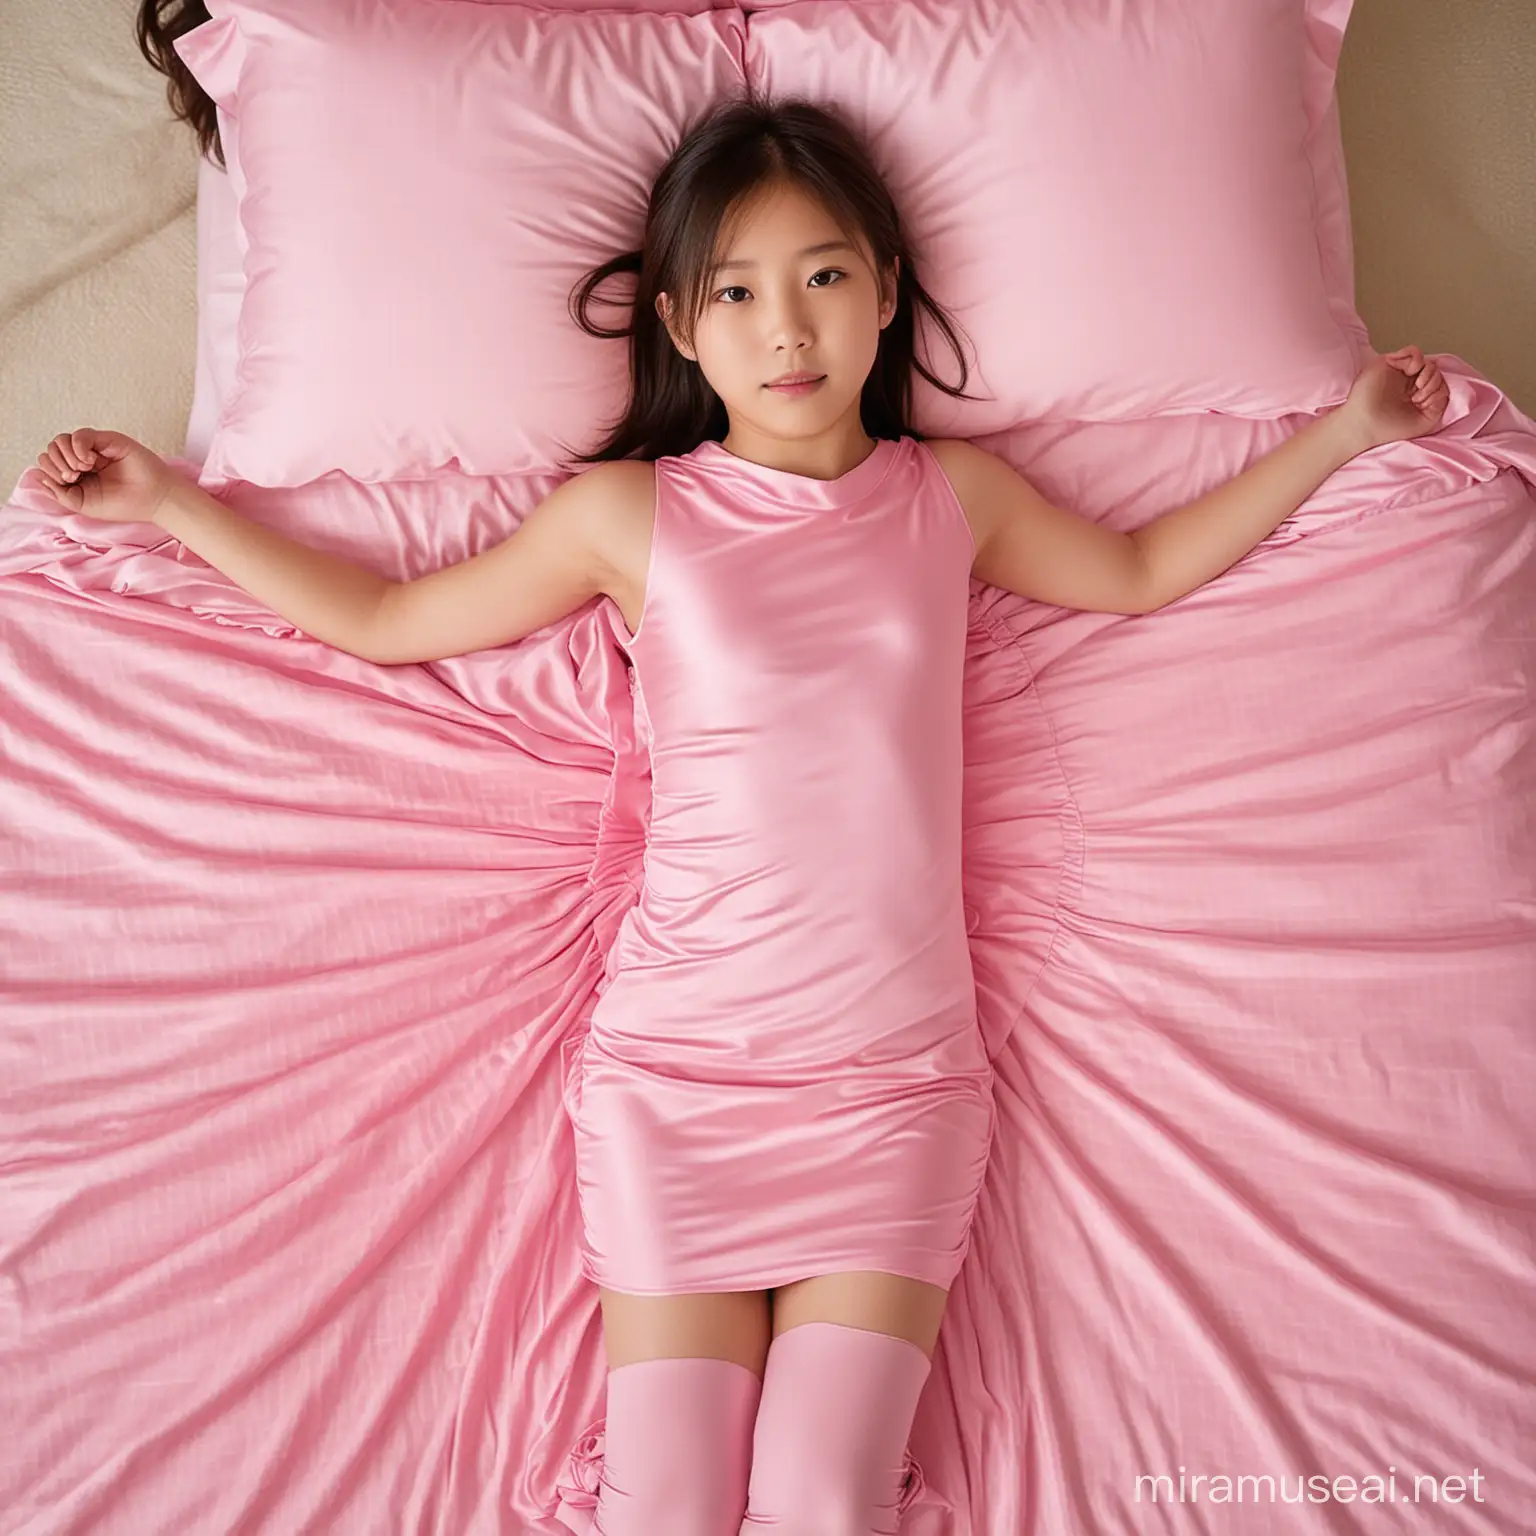 Japanese Schoolgirl in Pink Dress Lazing on Bed